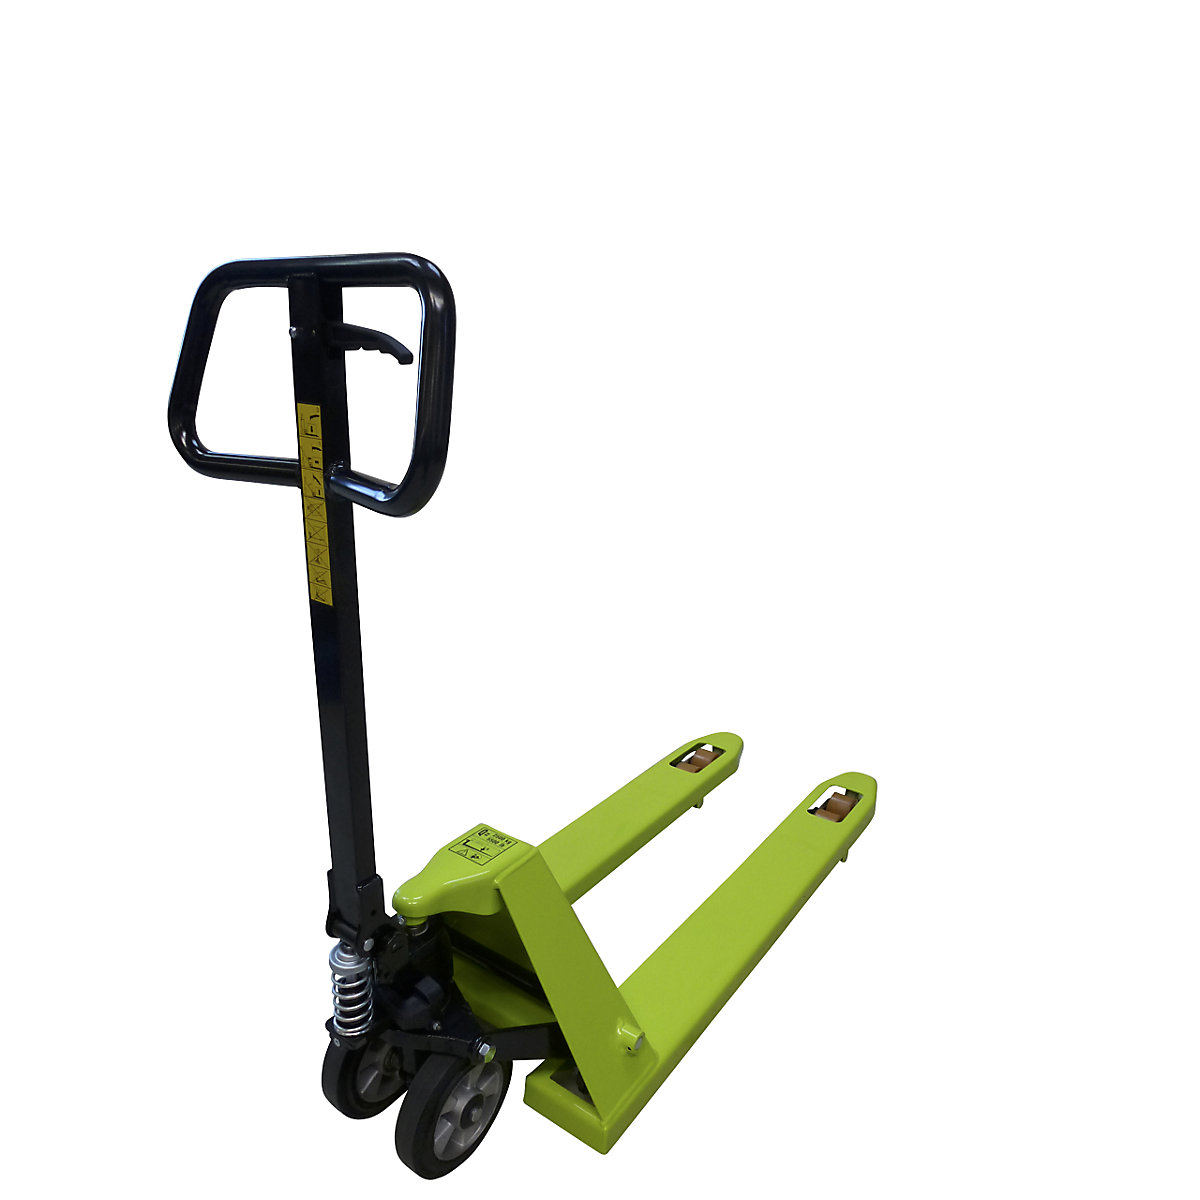 EVO pallet truck – Pramac, solid rubber steering wheels with aluminium core, fork length 800 mm, tandem fork rollers